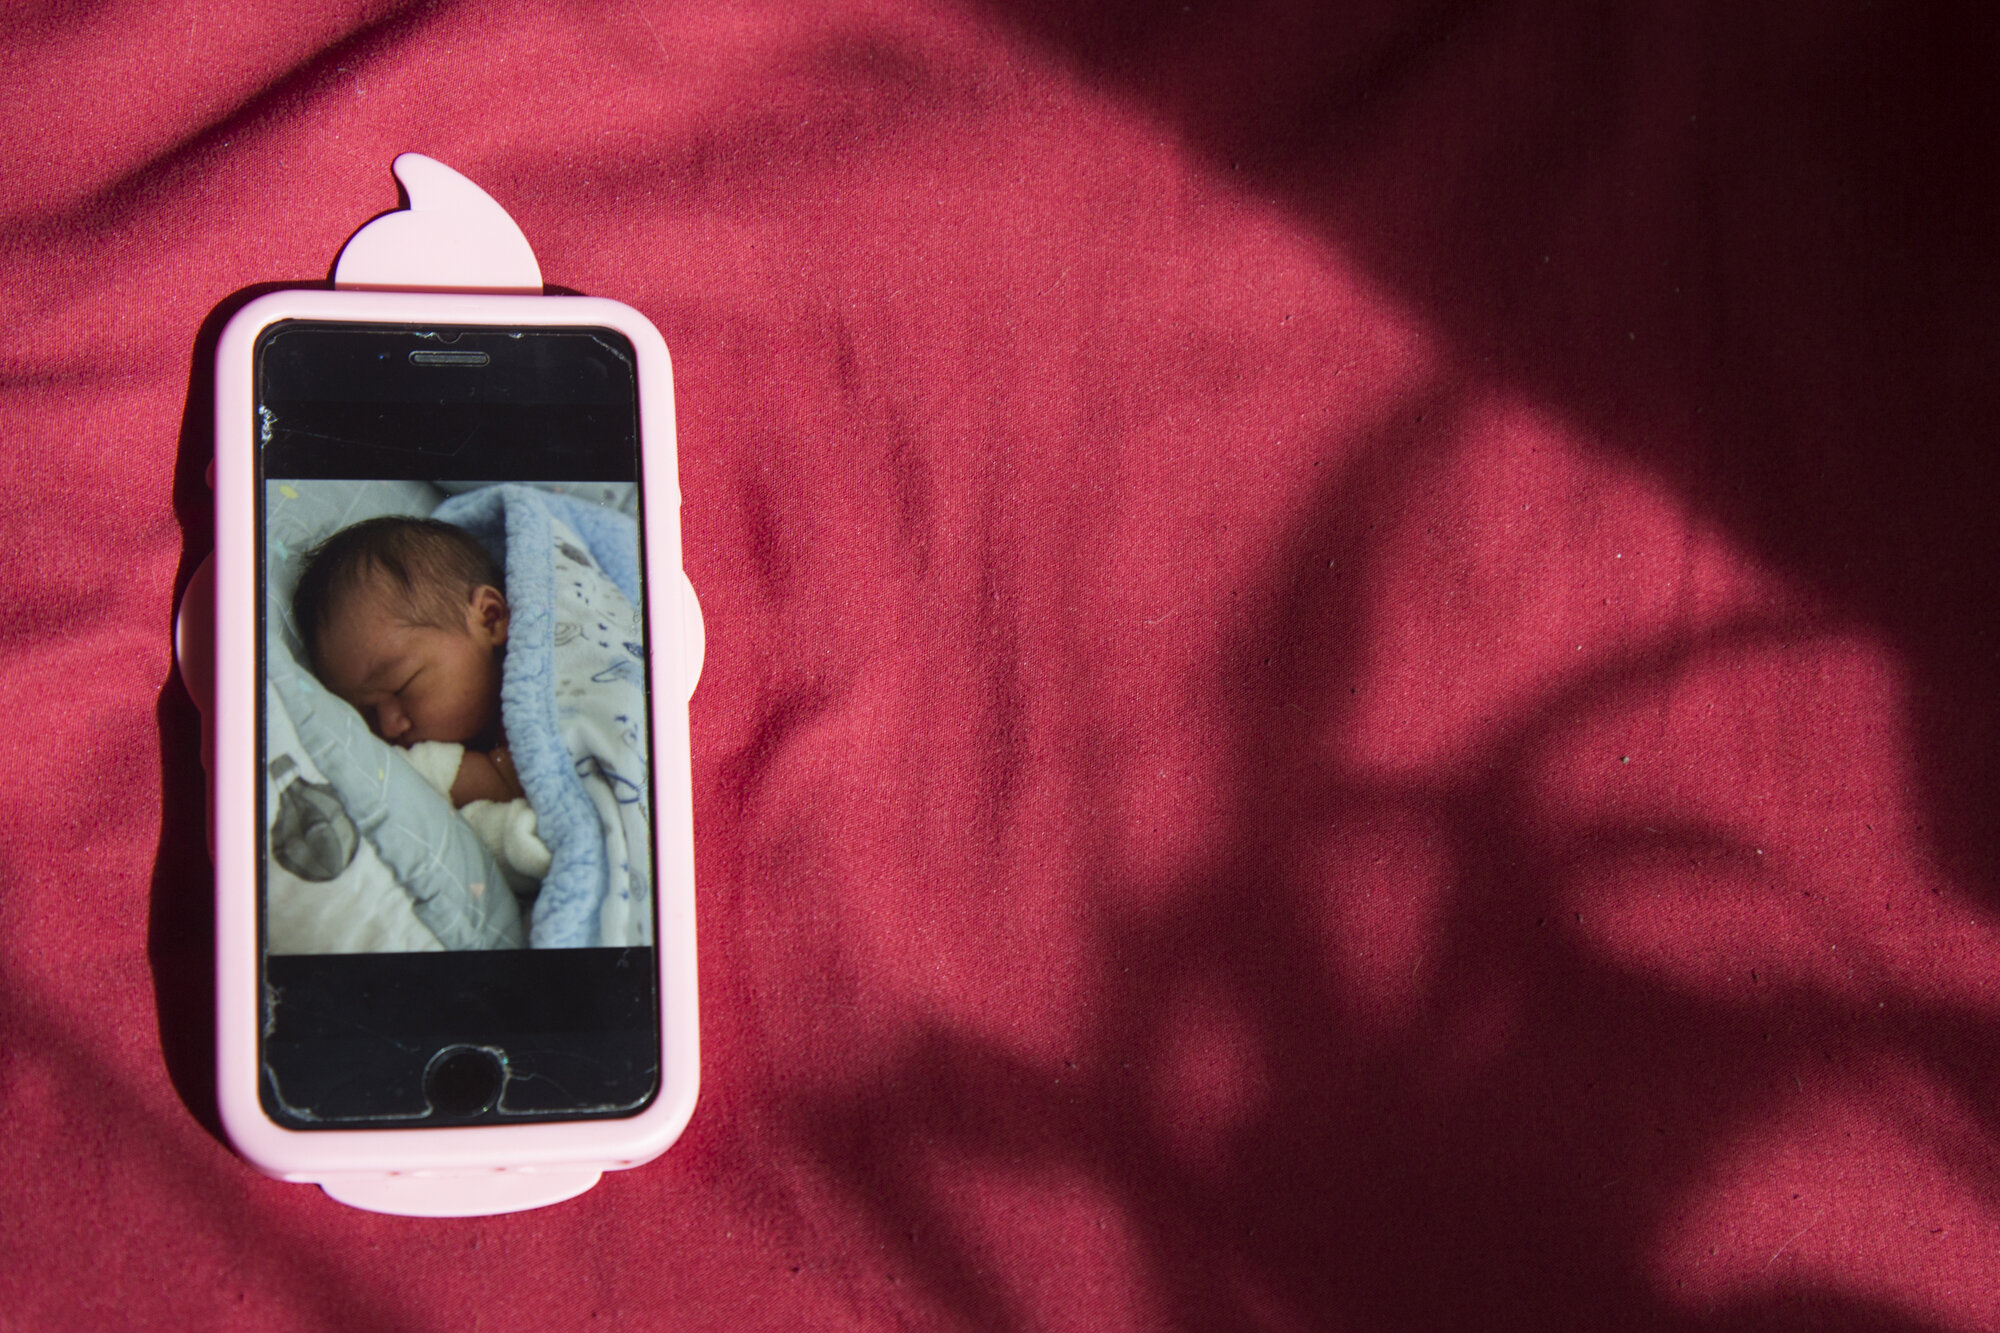  An iPhone picture of my newborn baby cousin, Zavian, sits on my bed. Despite only being 20 minutes away by car, we haven’t been able to see him much since his birth. For about a month, we were limited to FaceTime interactions and pictures sent by hi